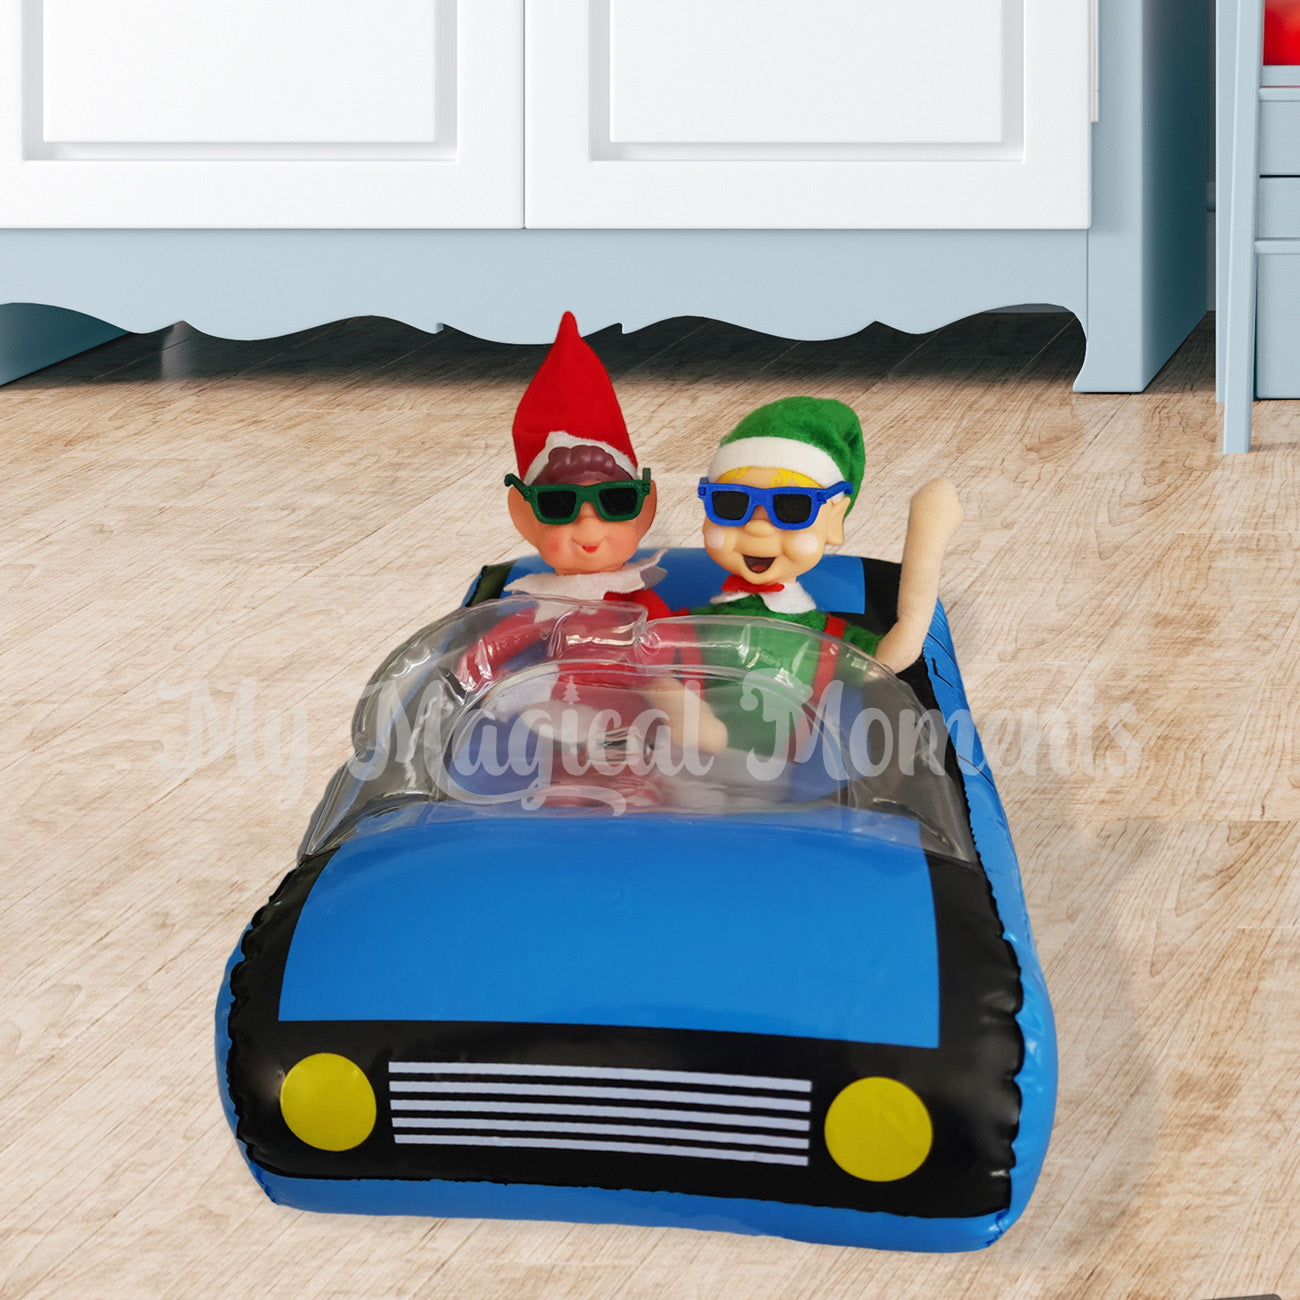 Elves driving in a car wearing sunnies